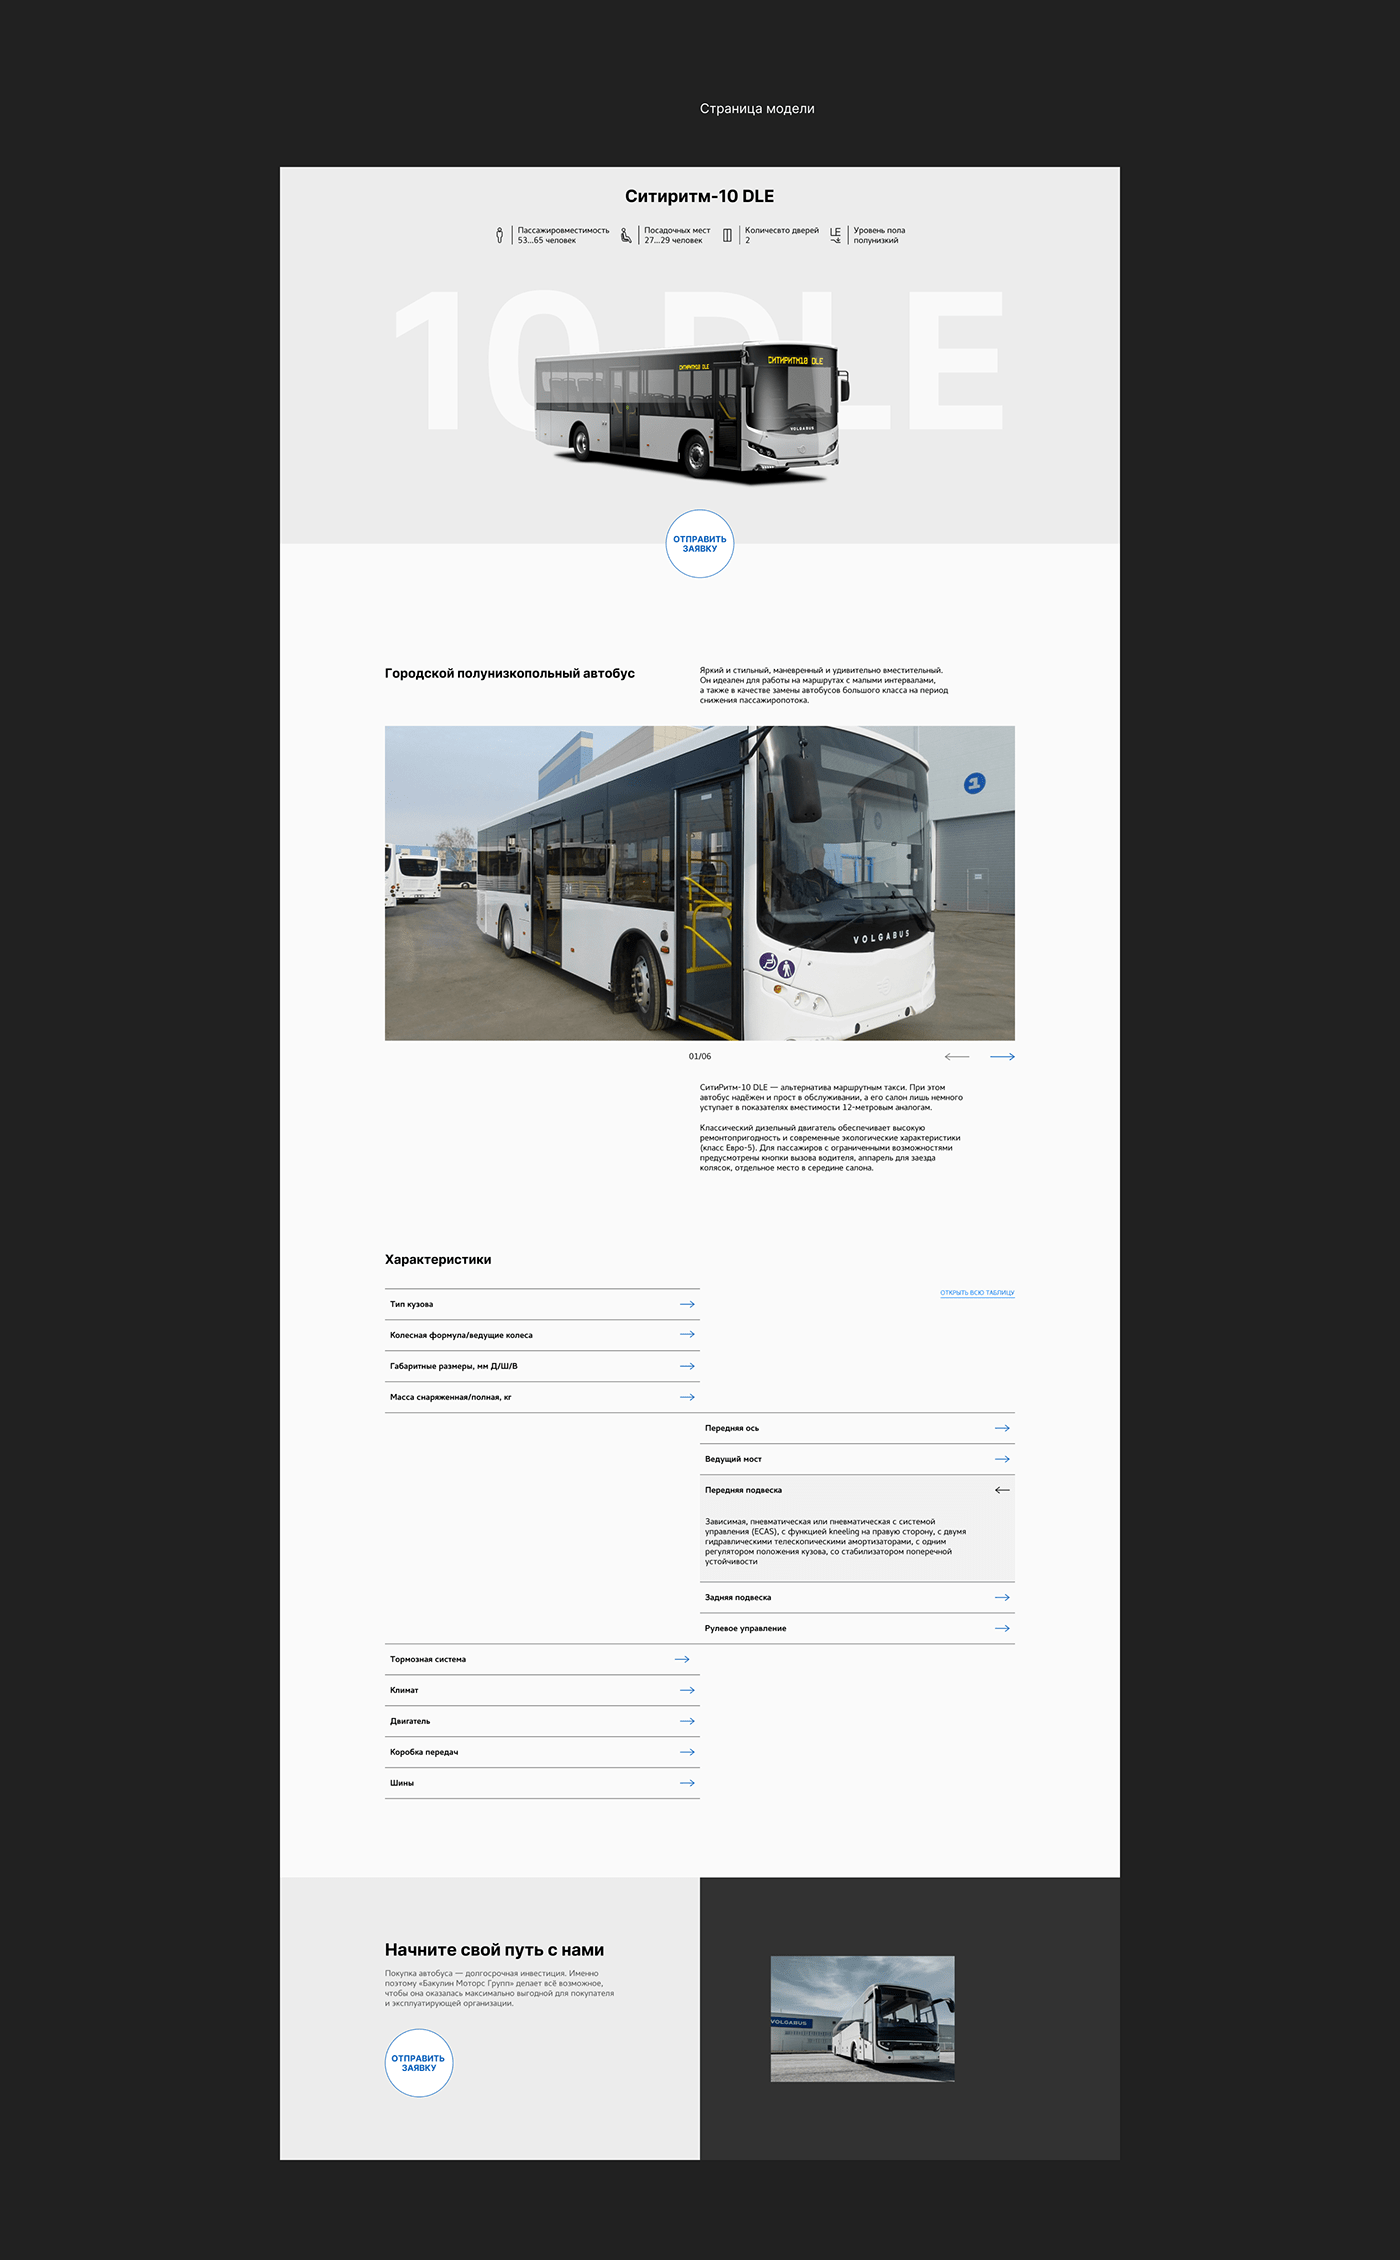 buses business corporate public transport redesign UI/UX user experience user interface Web Design 